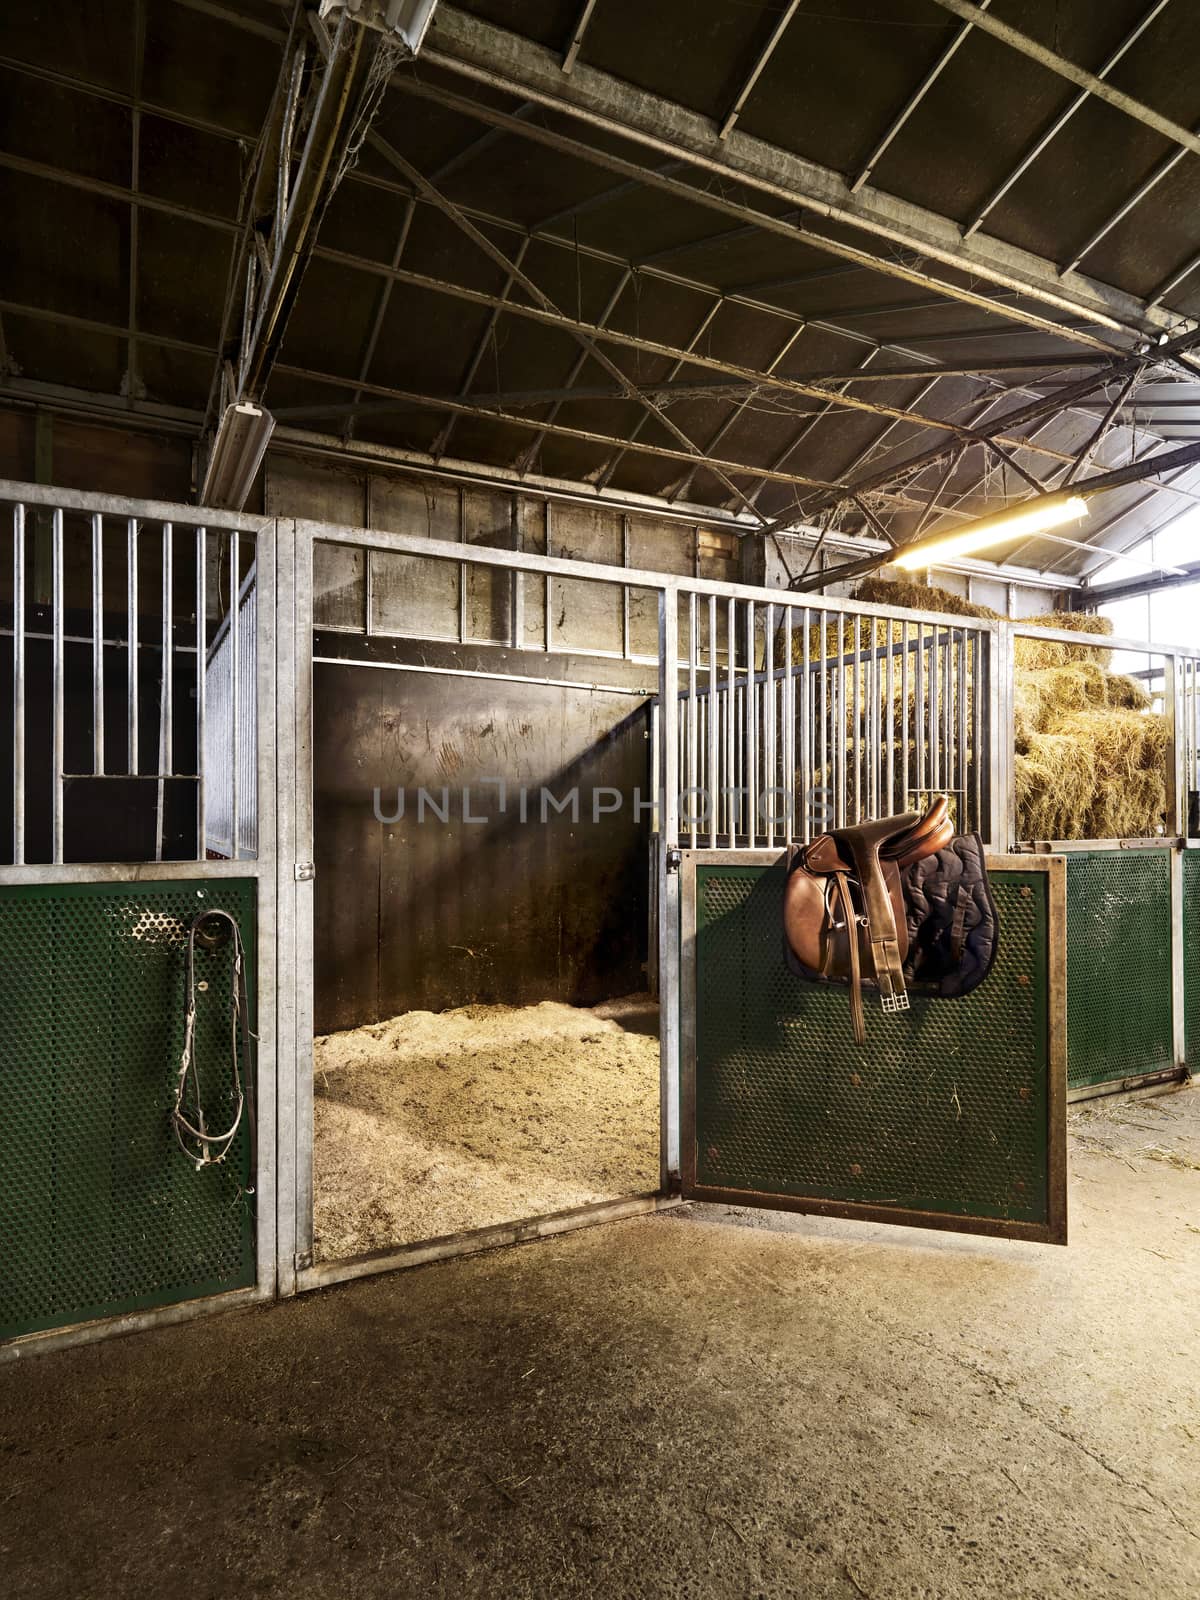 riding school with horse stable by janssenkruseproductions